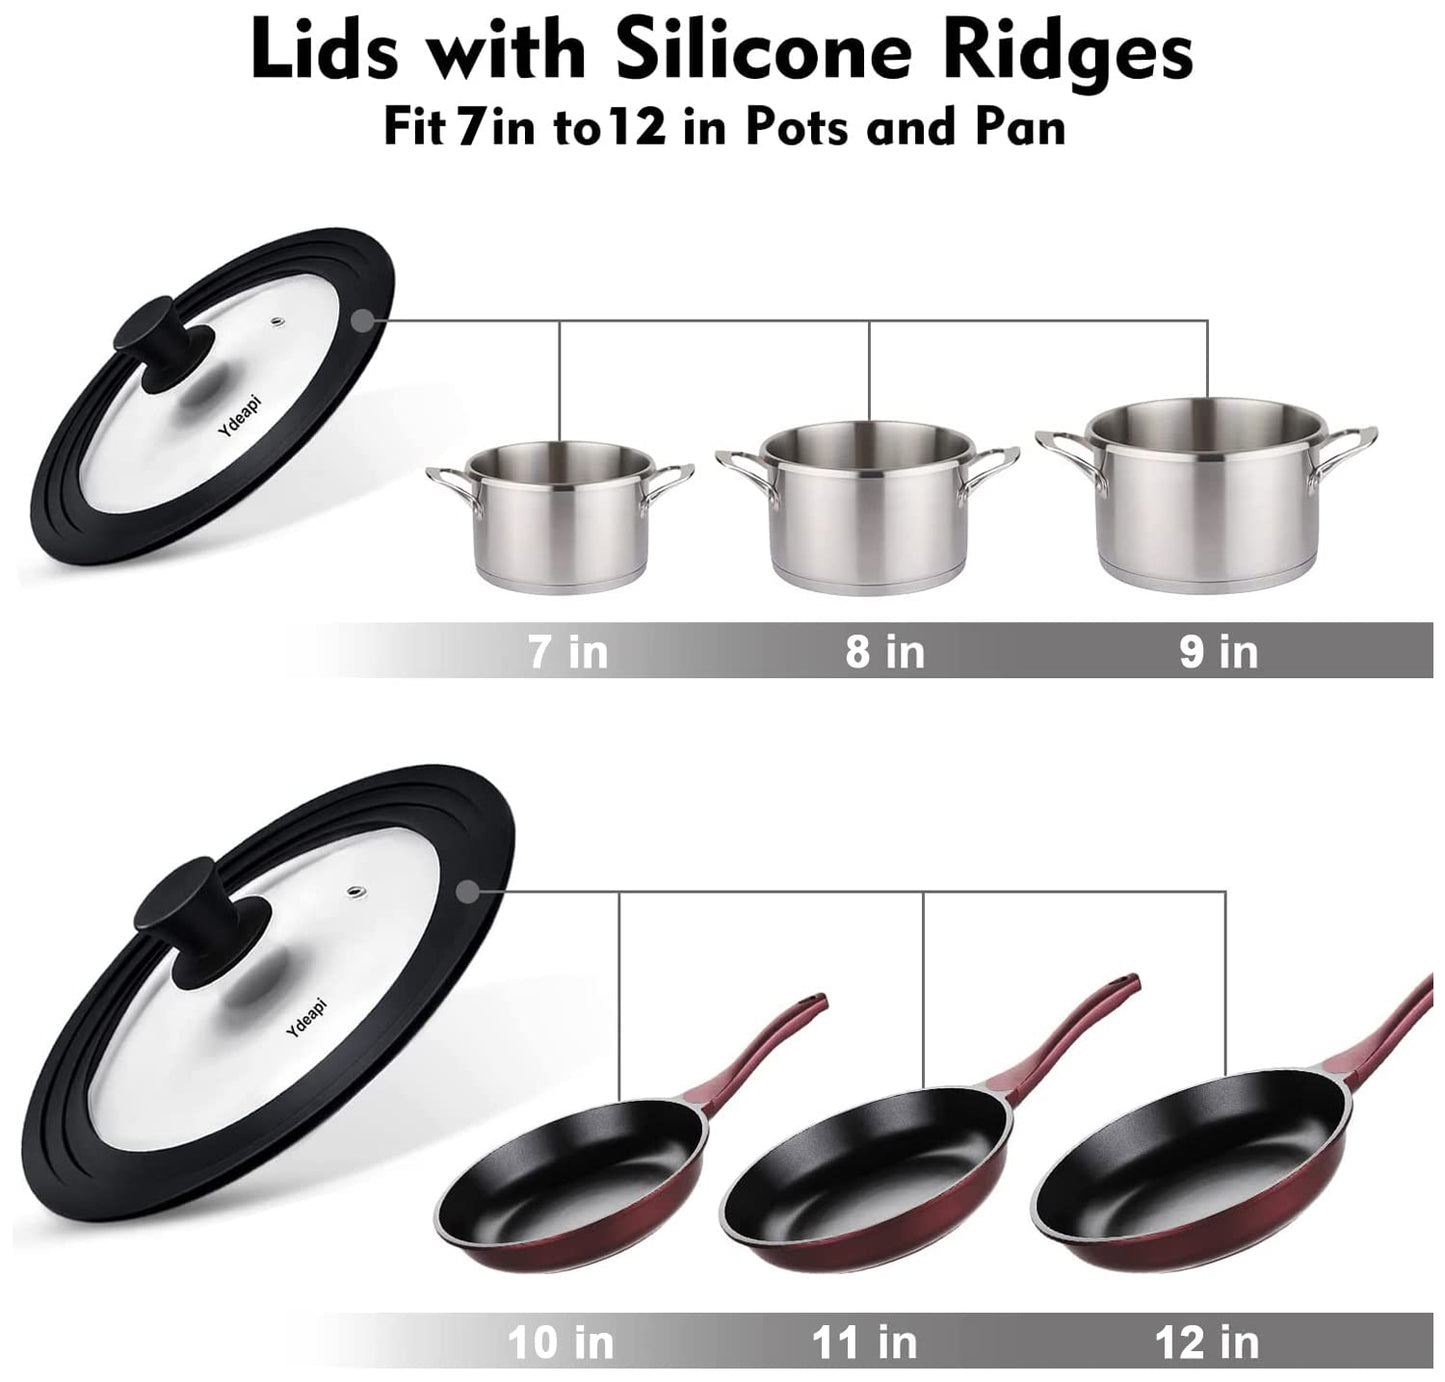 Ydeapi Universal Lids for Pots, Pans & Skillets - Fits 7", 8" & 9" Diameter, 10", 11" & 12" Diameter Cookware, Tempered Glass with High Heat Resistant Silicone Rim (2PK)